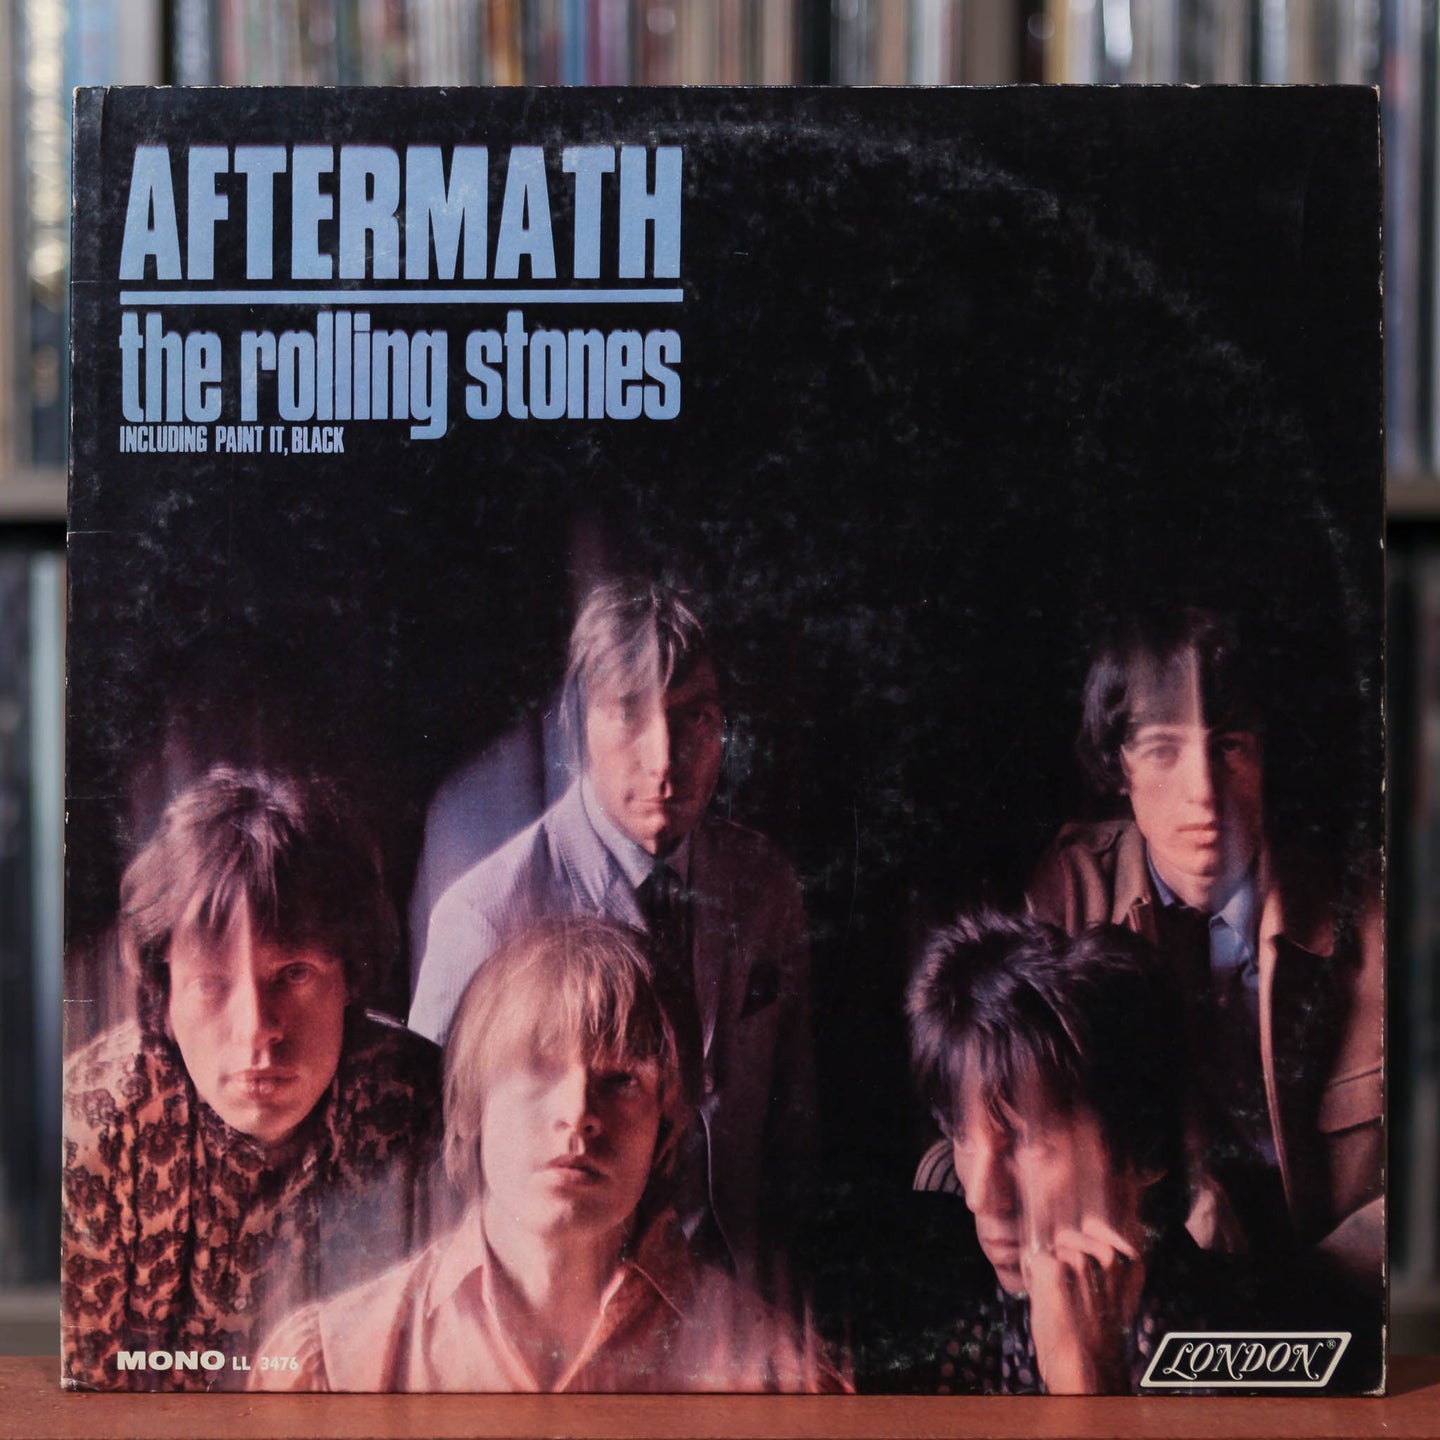 Rolling Stones - Aftermath - 1966 London, VG+/VG